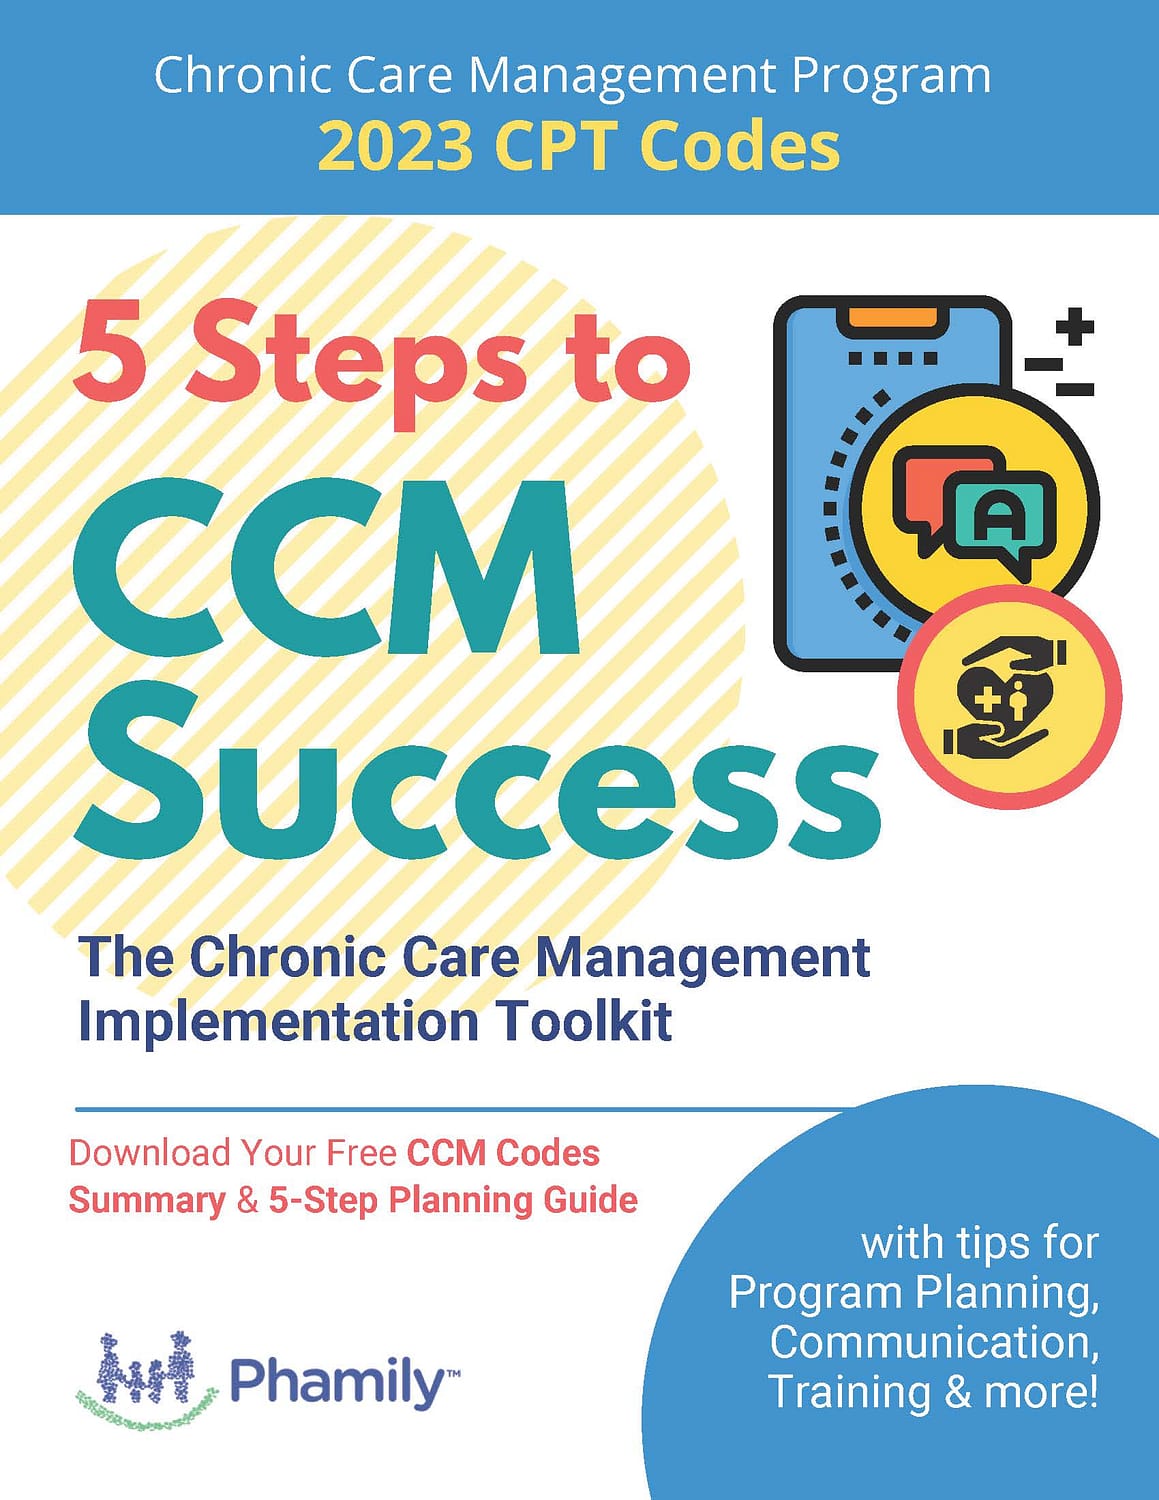 Image preview of "5 Steps to CCM Success"